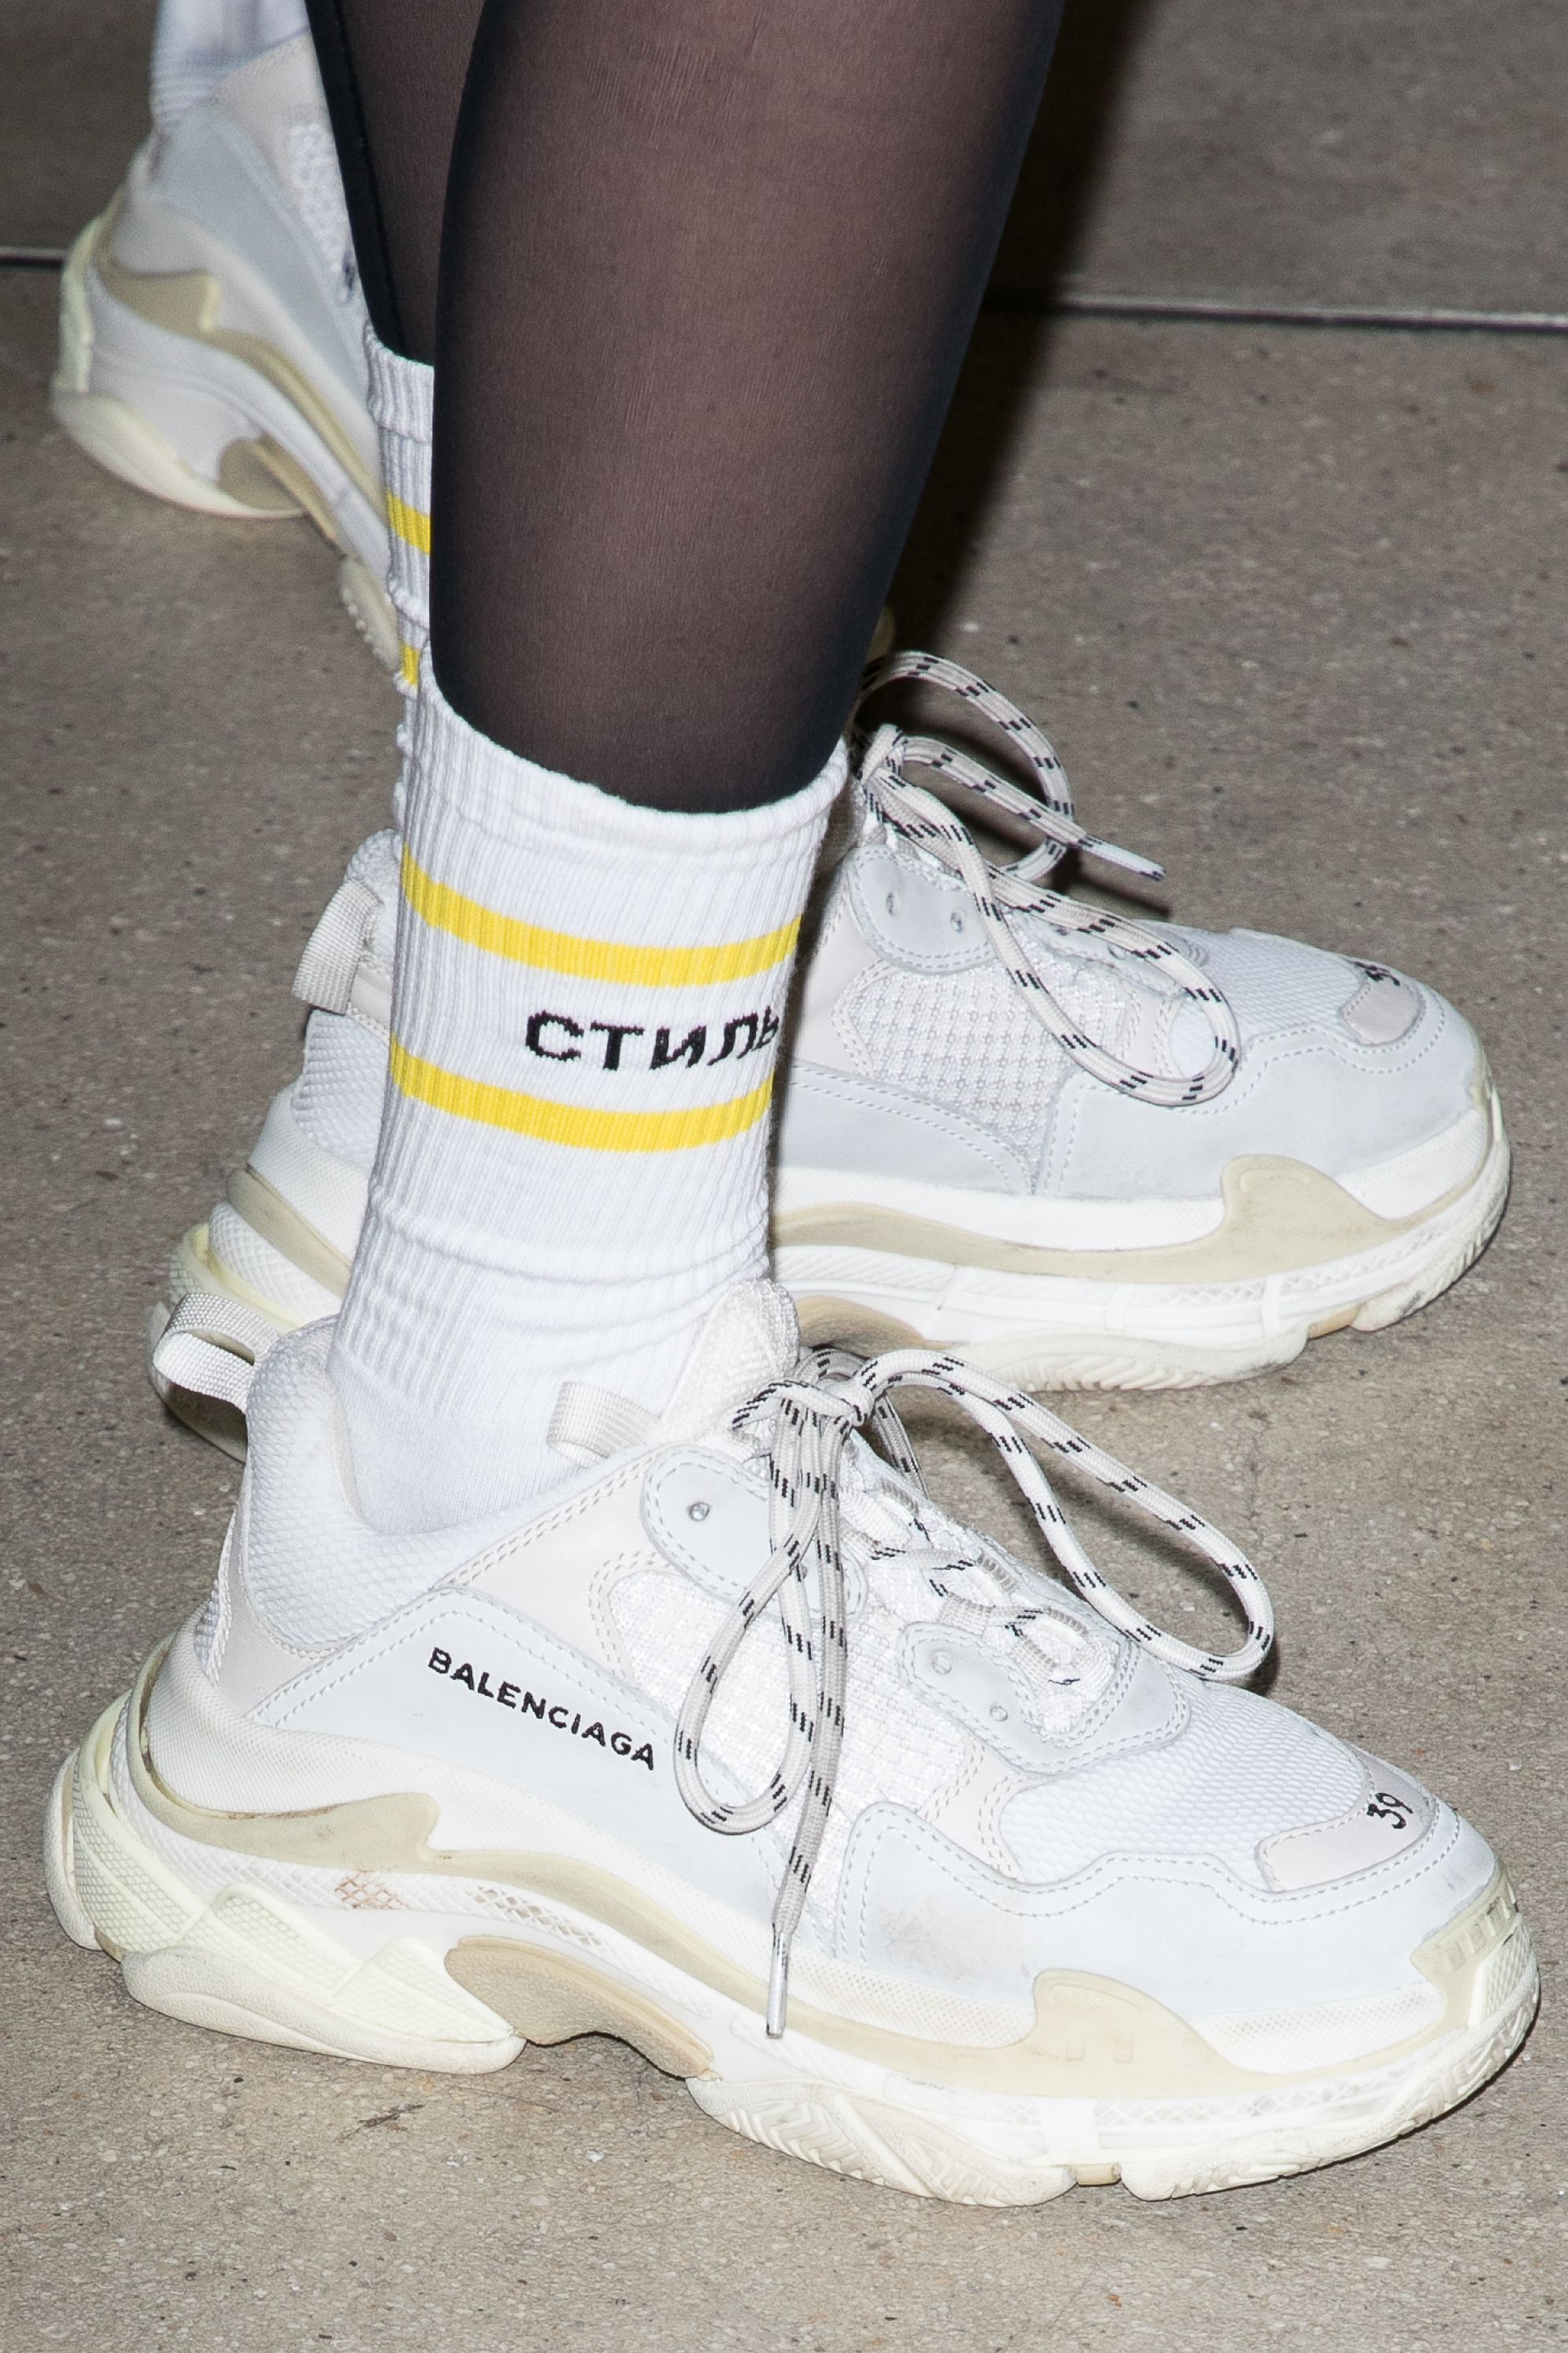 Fila Disruptors Are The Ugly Shoe du Jour - Help Me, I'm About to Break My  Shopping Fast For These Hideous Shoes